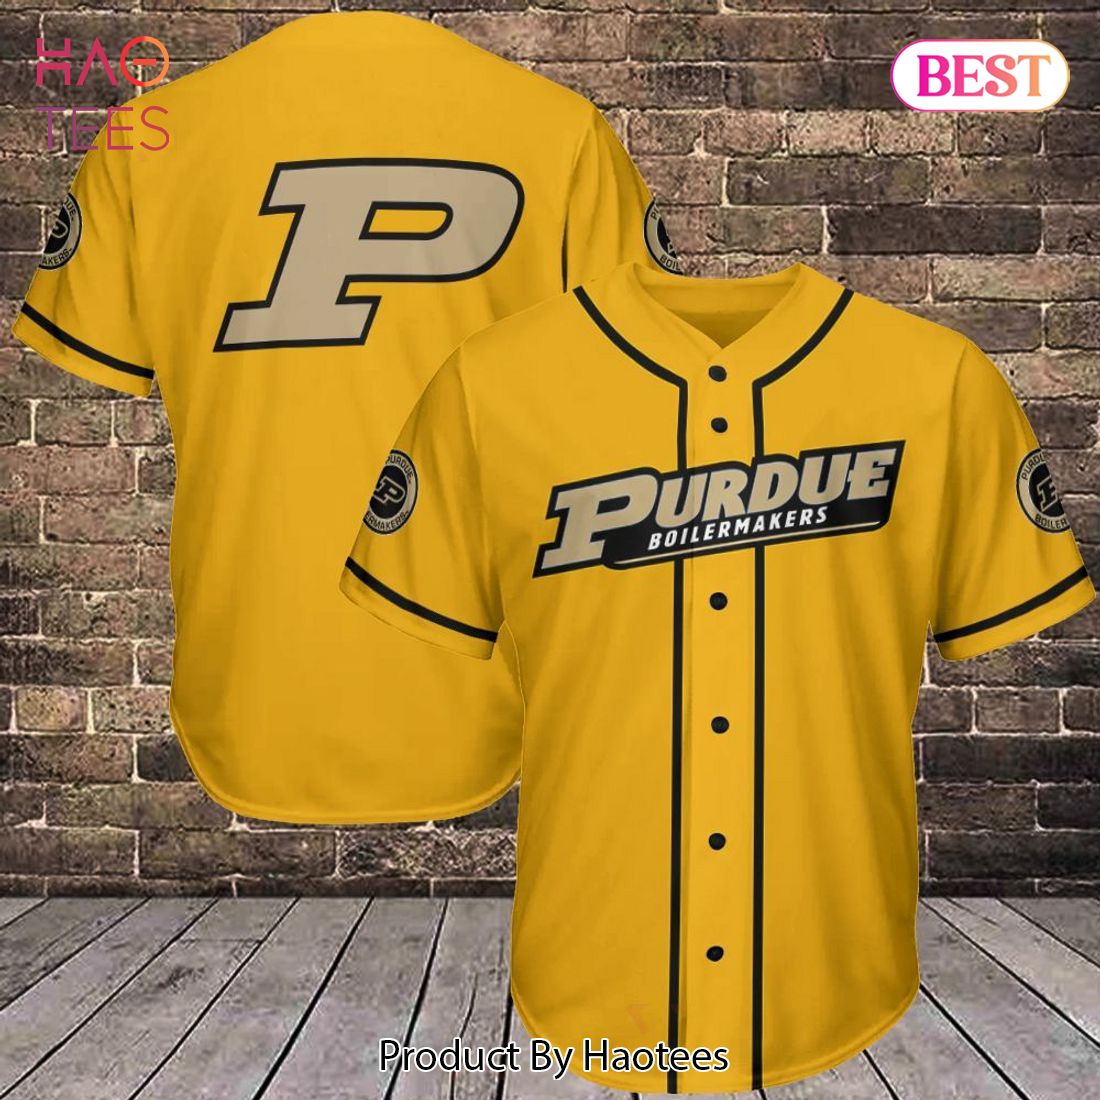 AVAILABLE Purdue Boilermakers Baseball Jersey 259